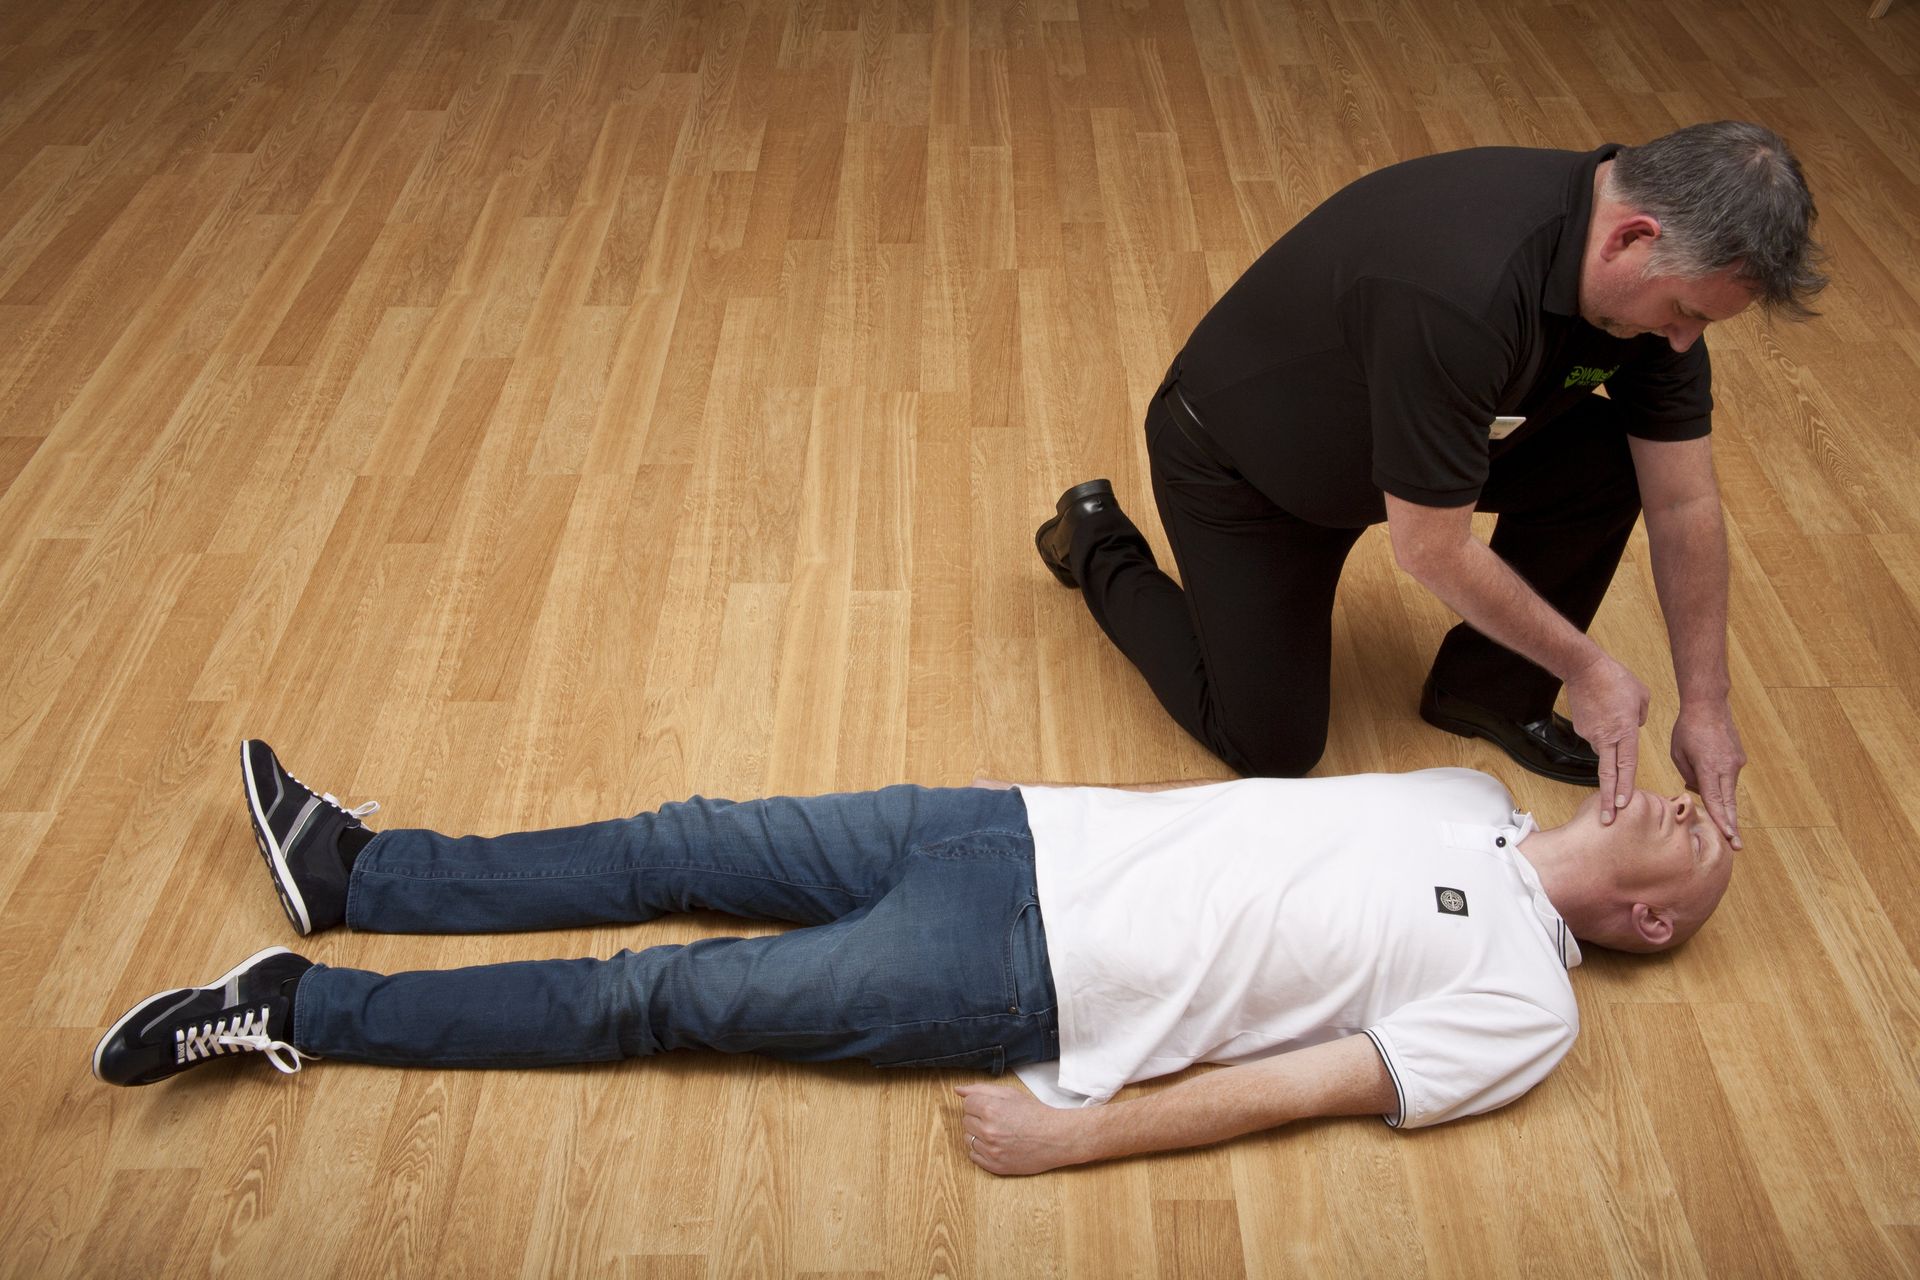 UK Providers of Workplace Tailored Basic Life Support Course